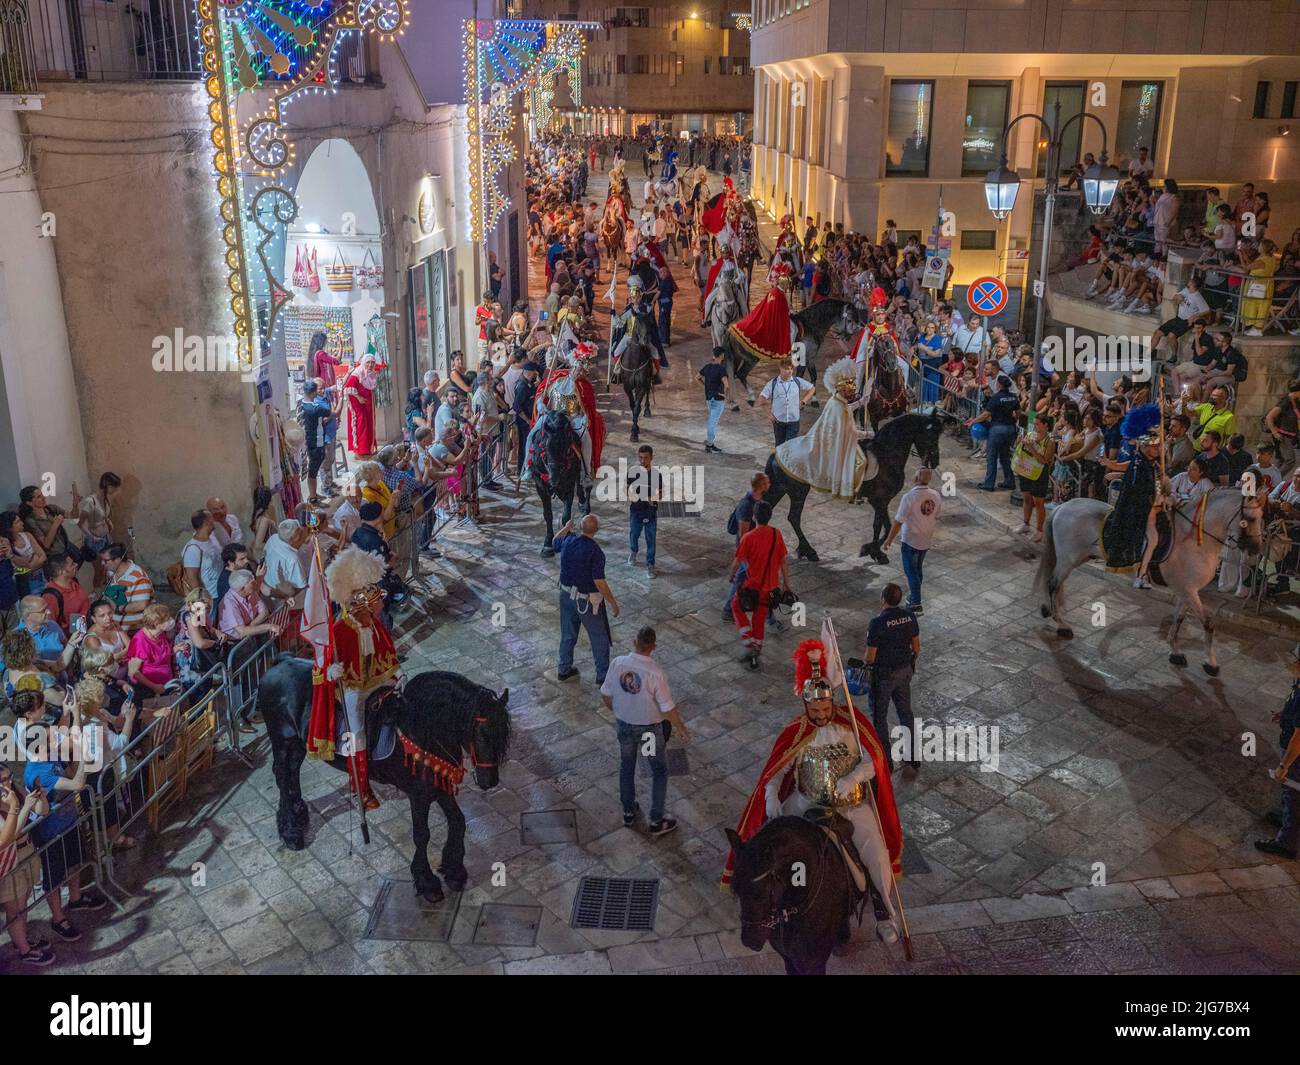 Procession for the celebration of the festival of the Brown Madonna of Matera with men on horseback in traditional garb leading the festivities Stock Photo